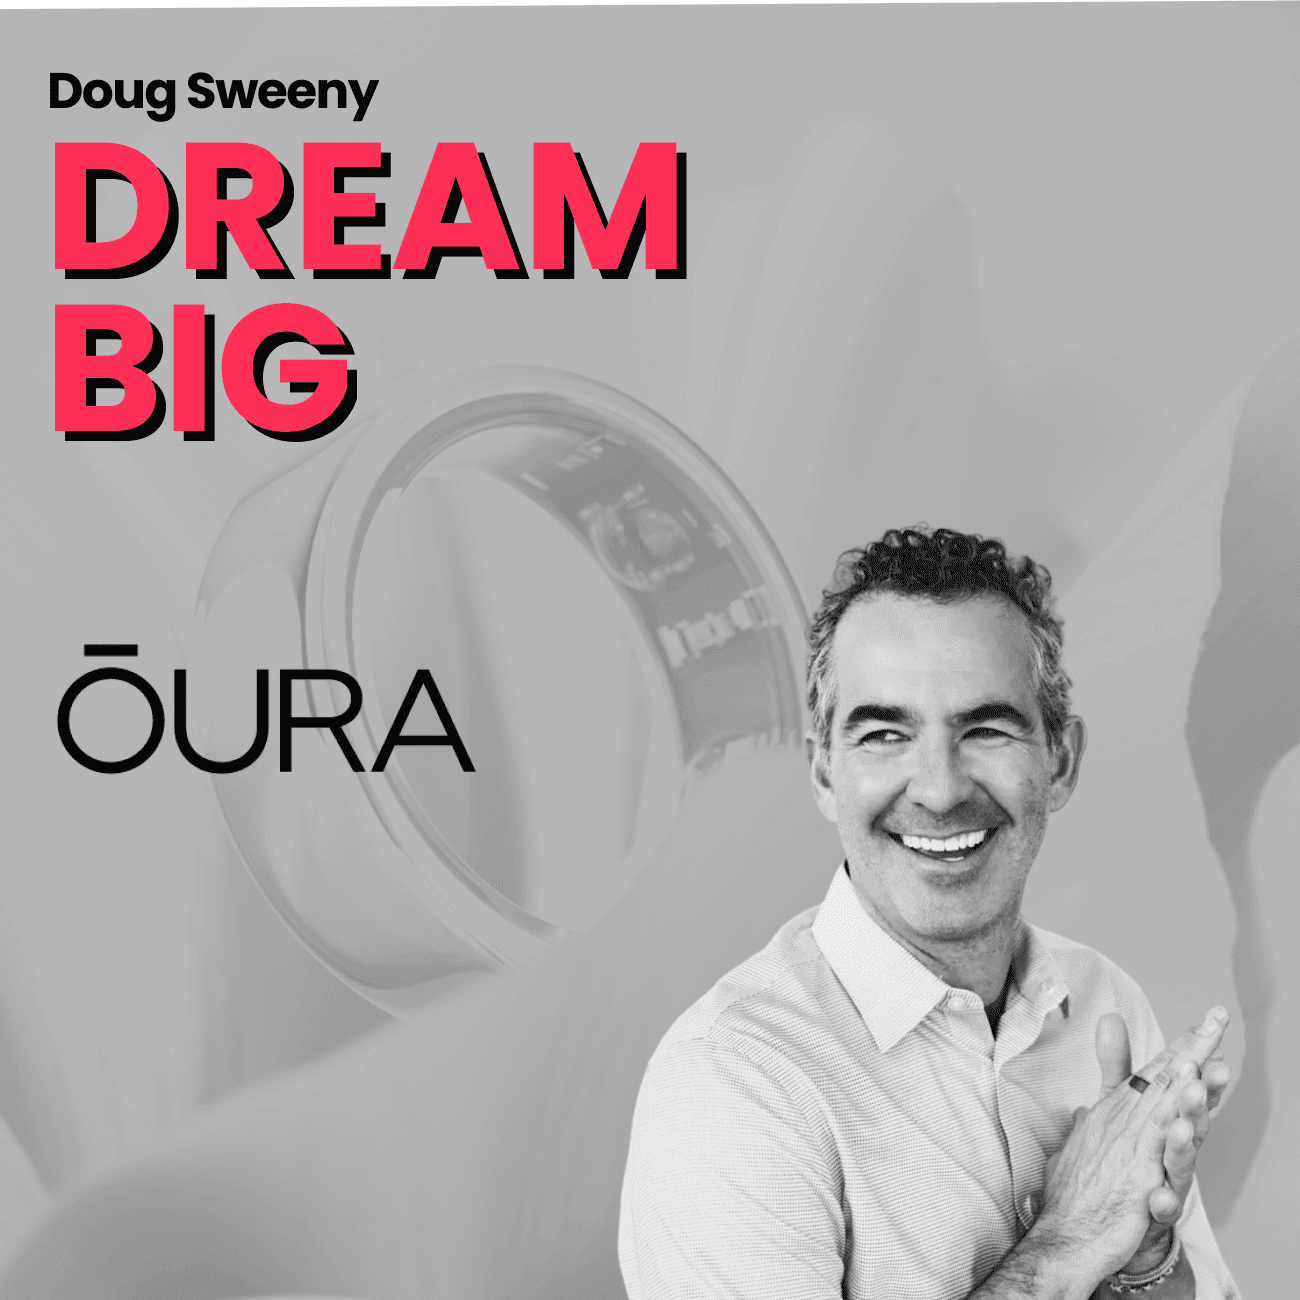 Chief Marketing Officer at Oura: Doug Sweeny